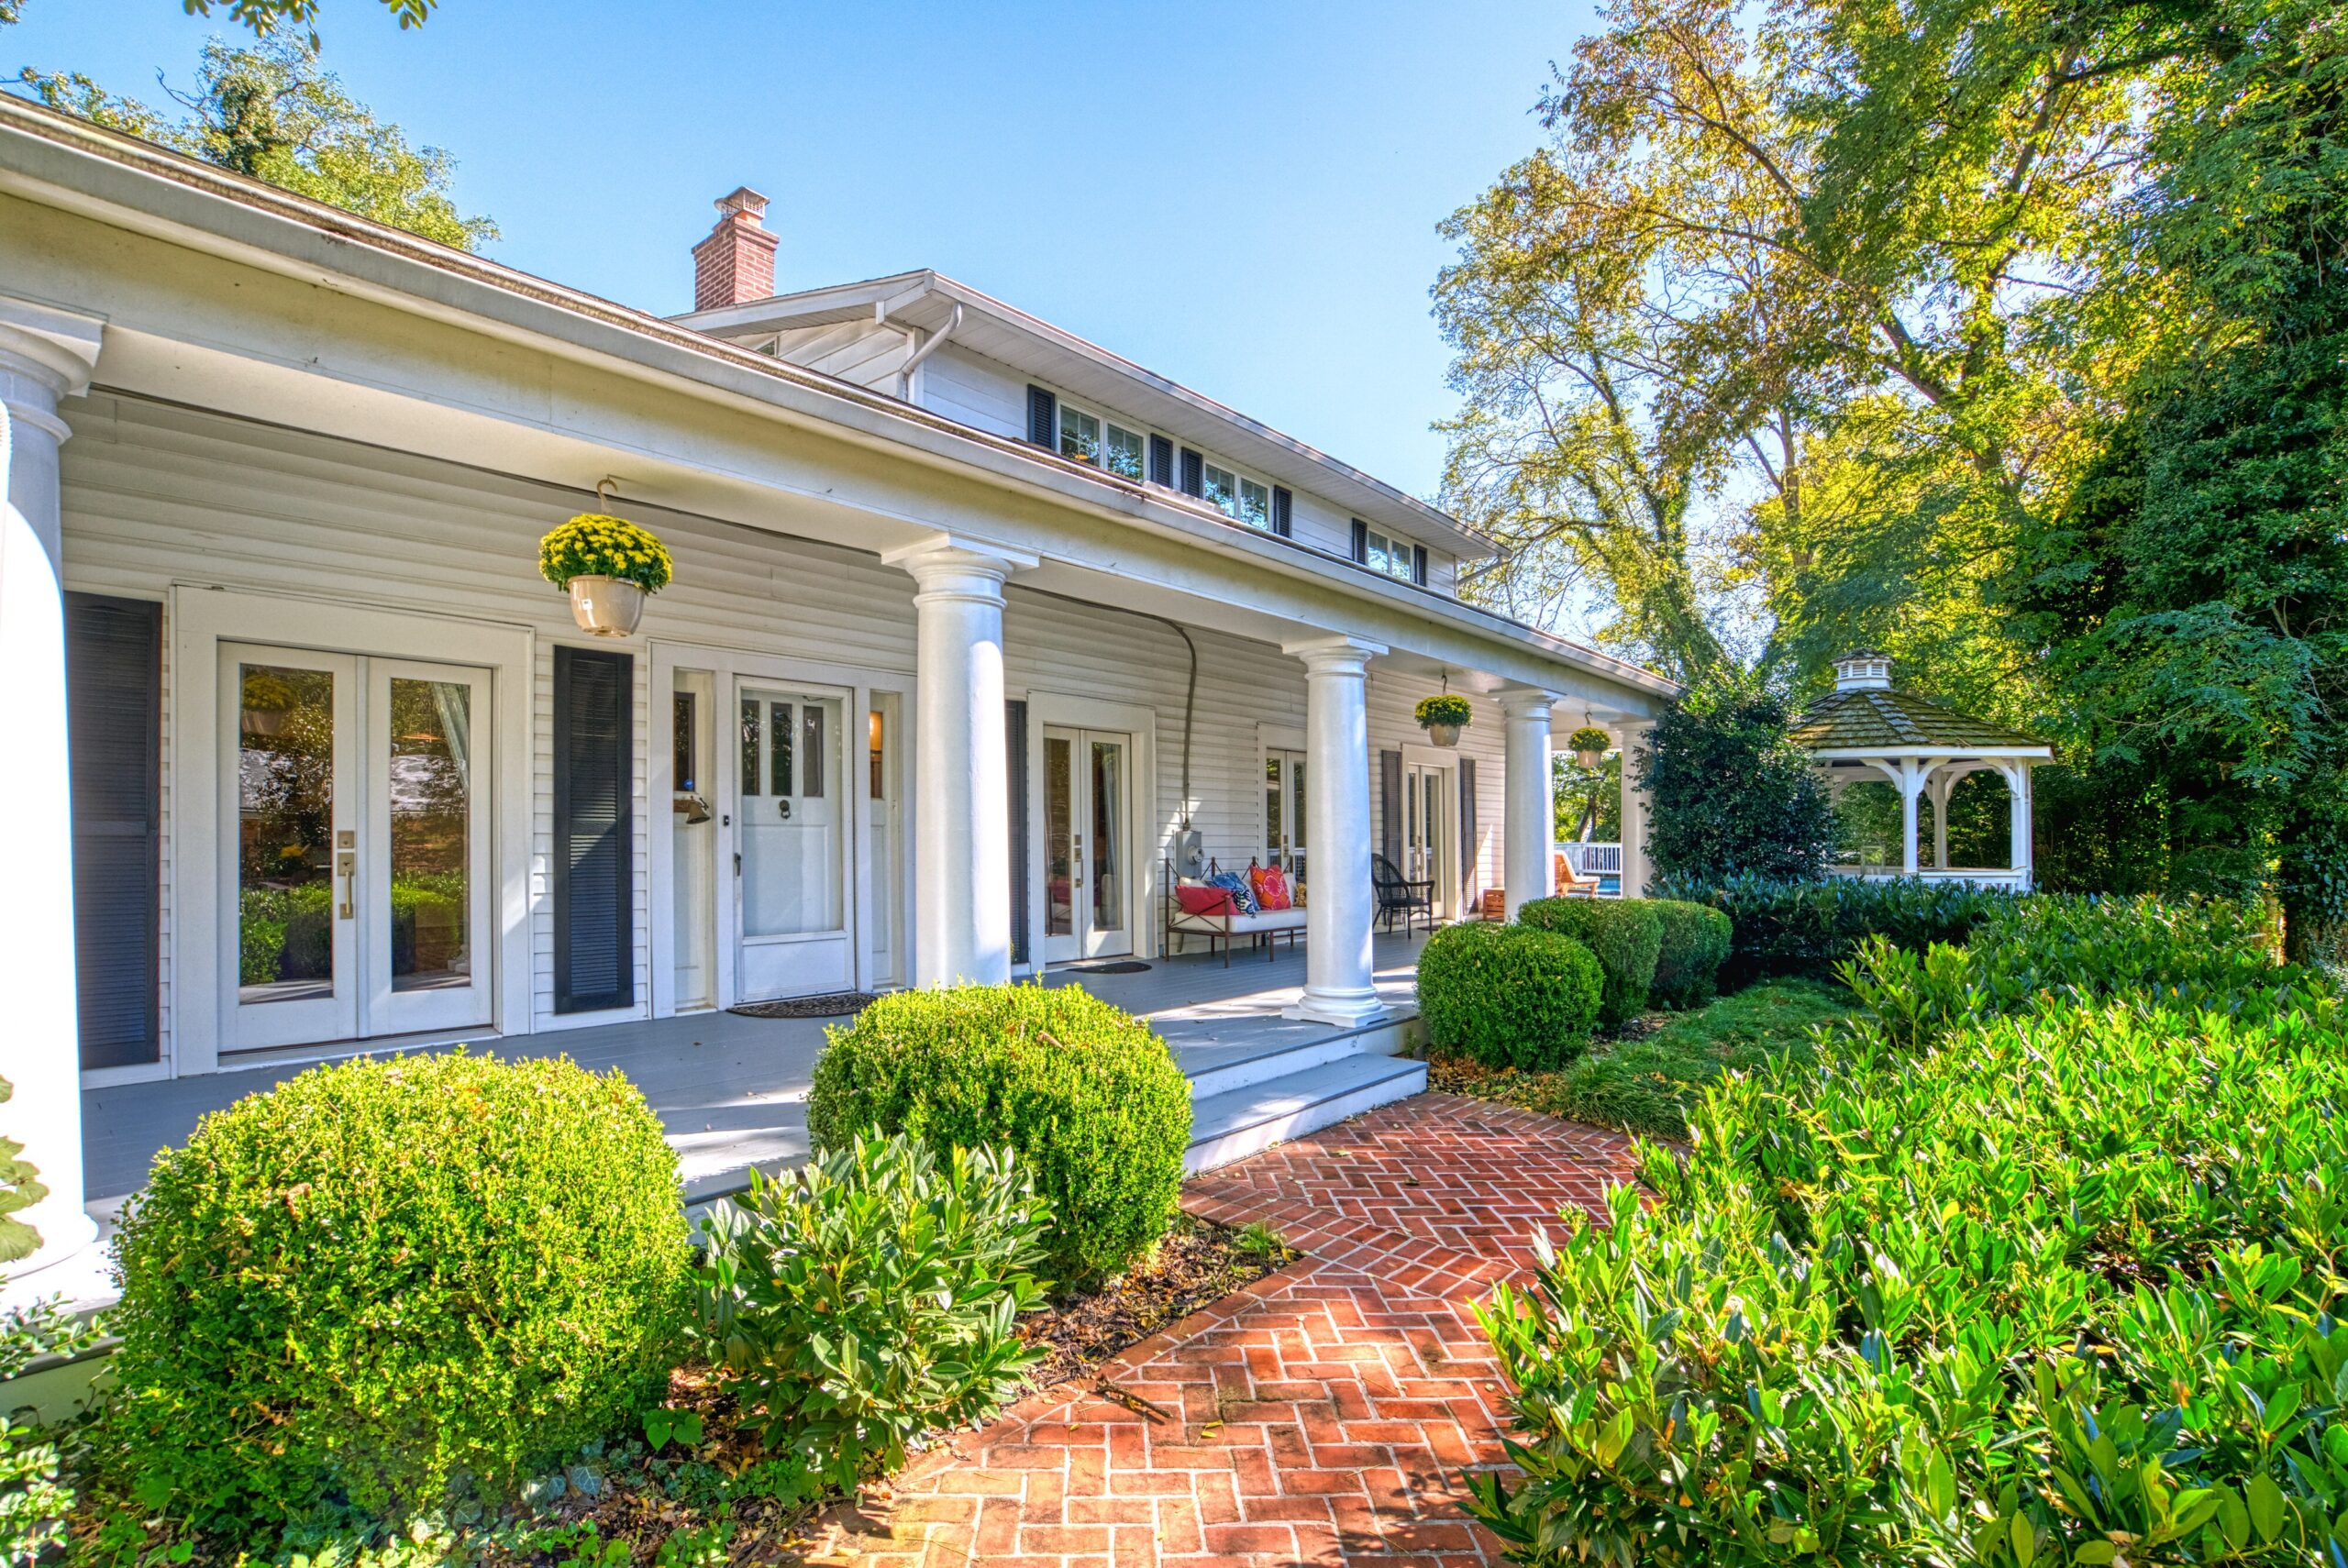 Exterior professional photo of 1826 Varnum St NW - showing a brick path leading to the front porch with thick white columns